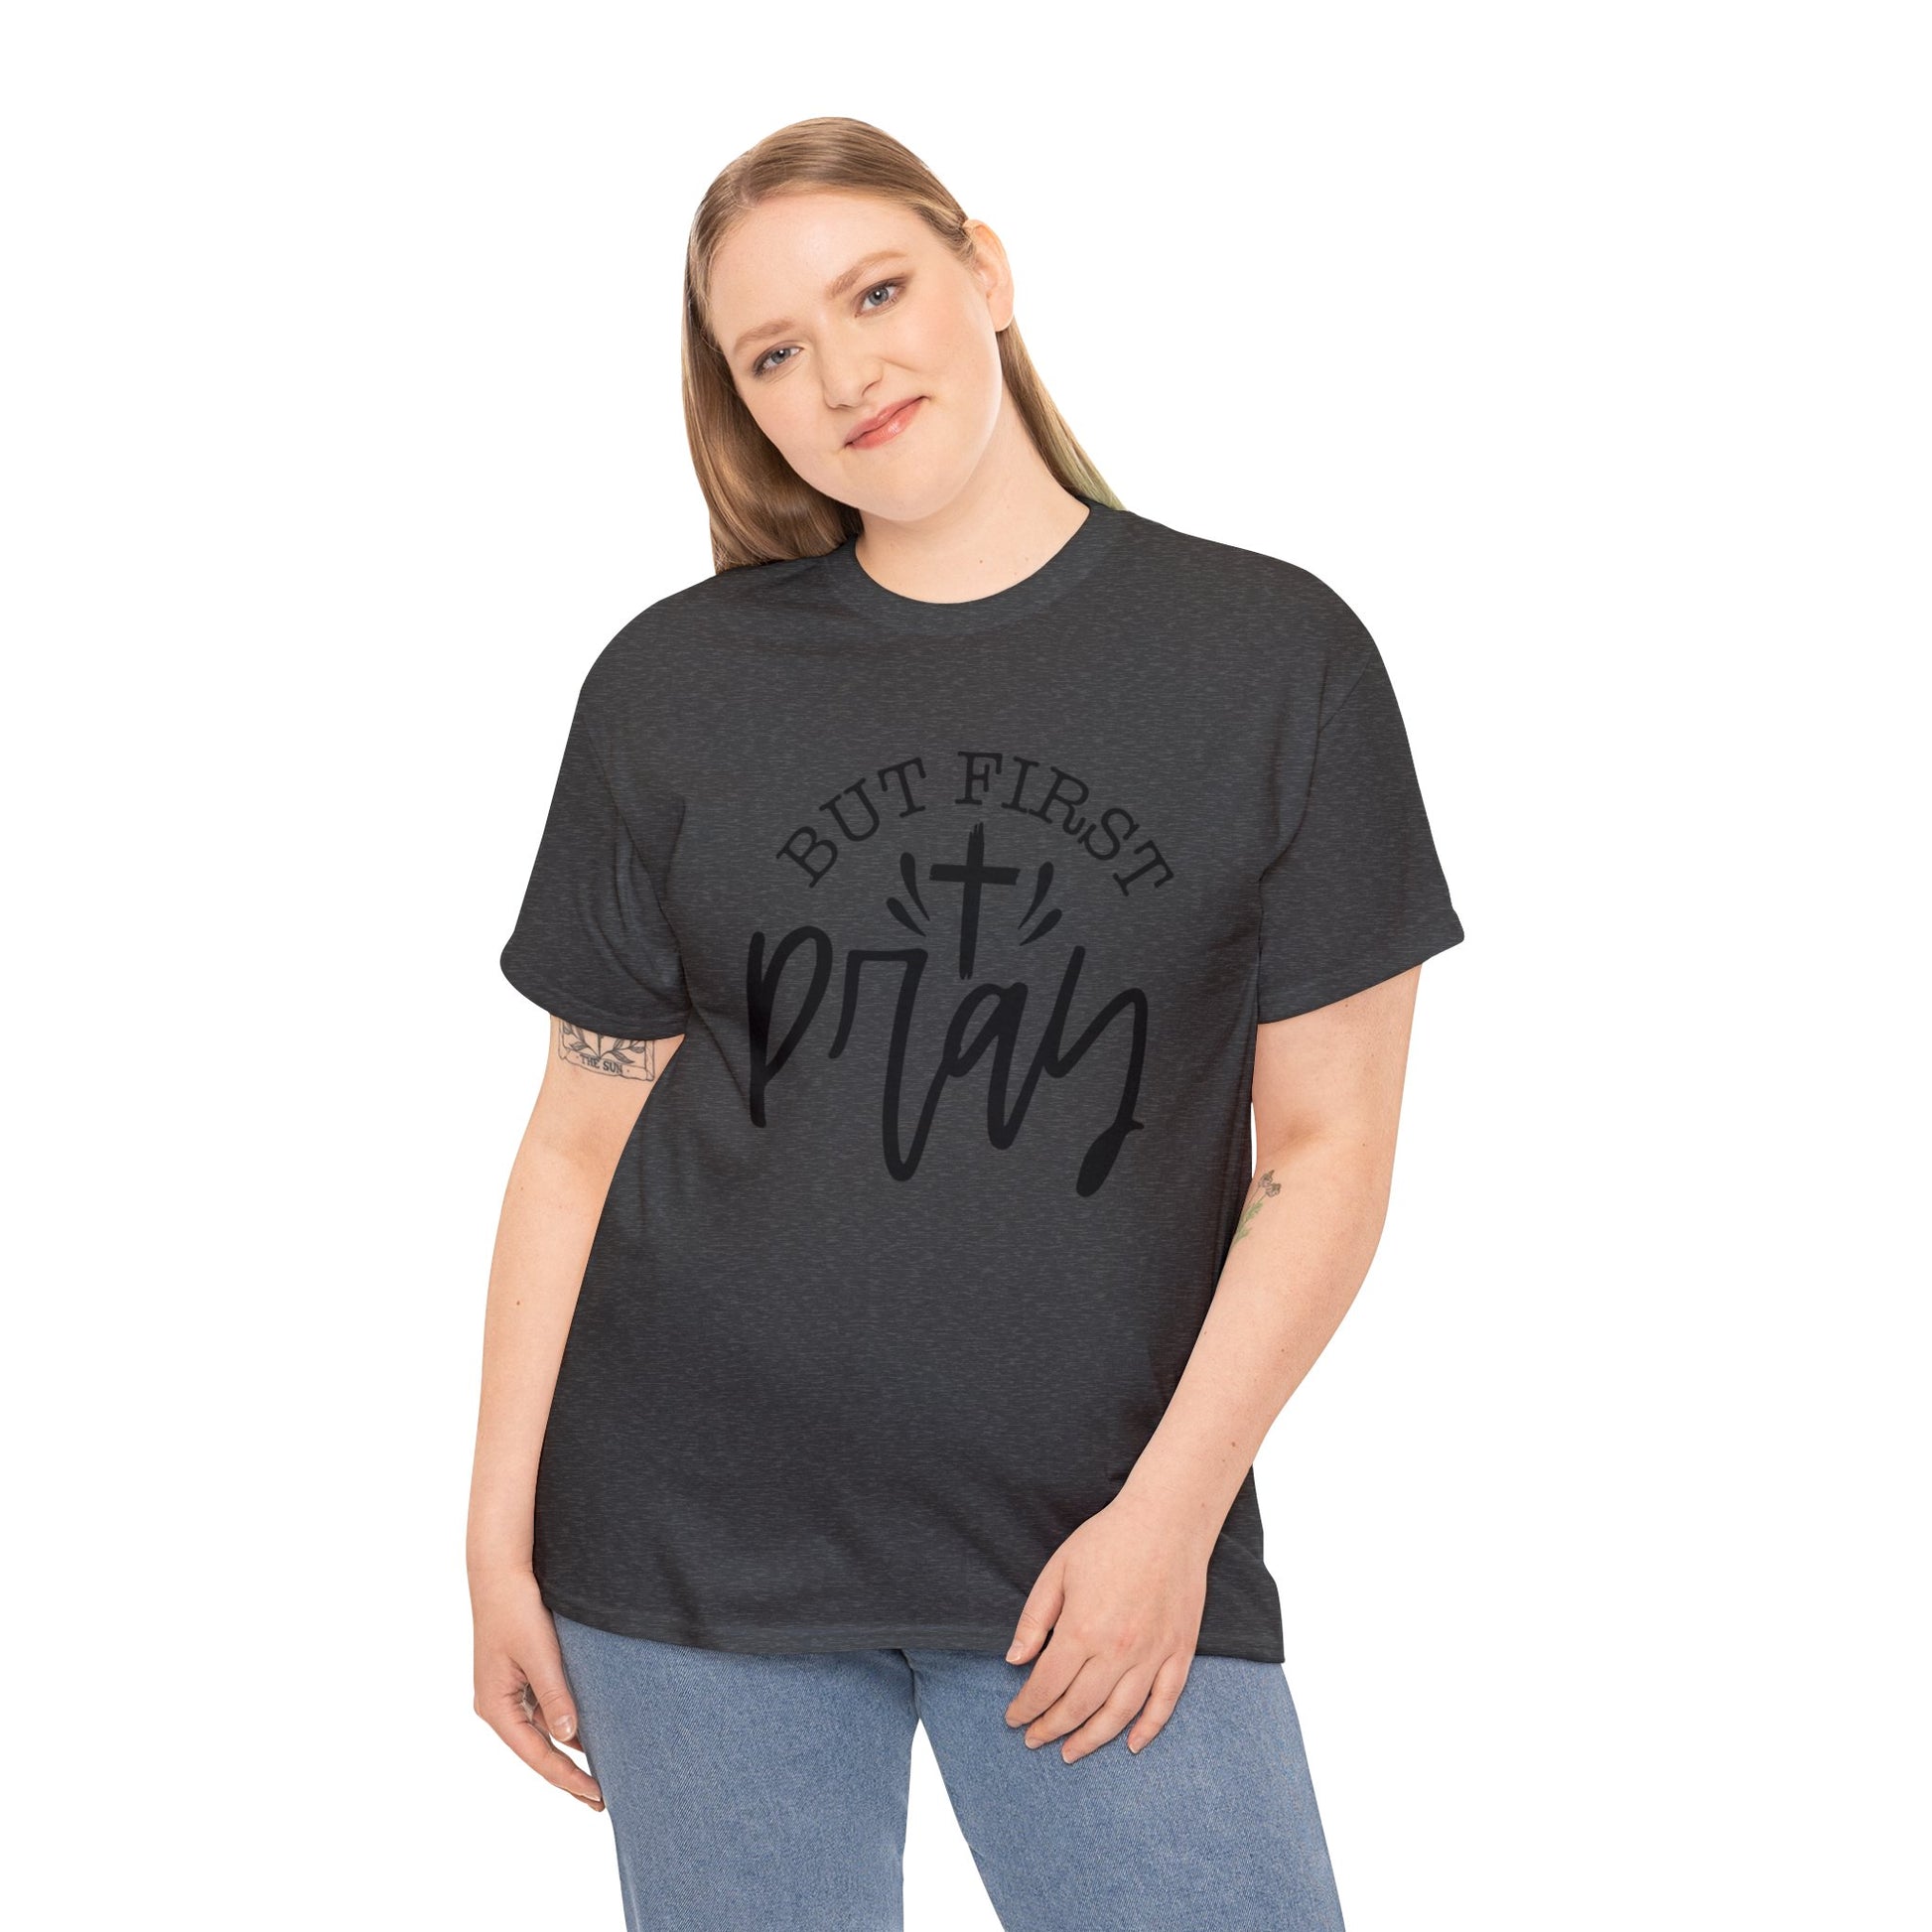 "But First, Pray" T-Shirt - Weave Got Gifts - Unique Gifts You Won’t Find Anywhere Else!